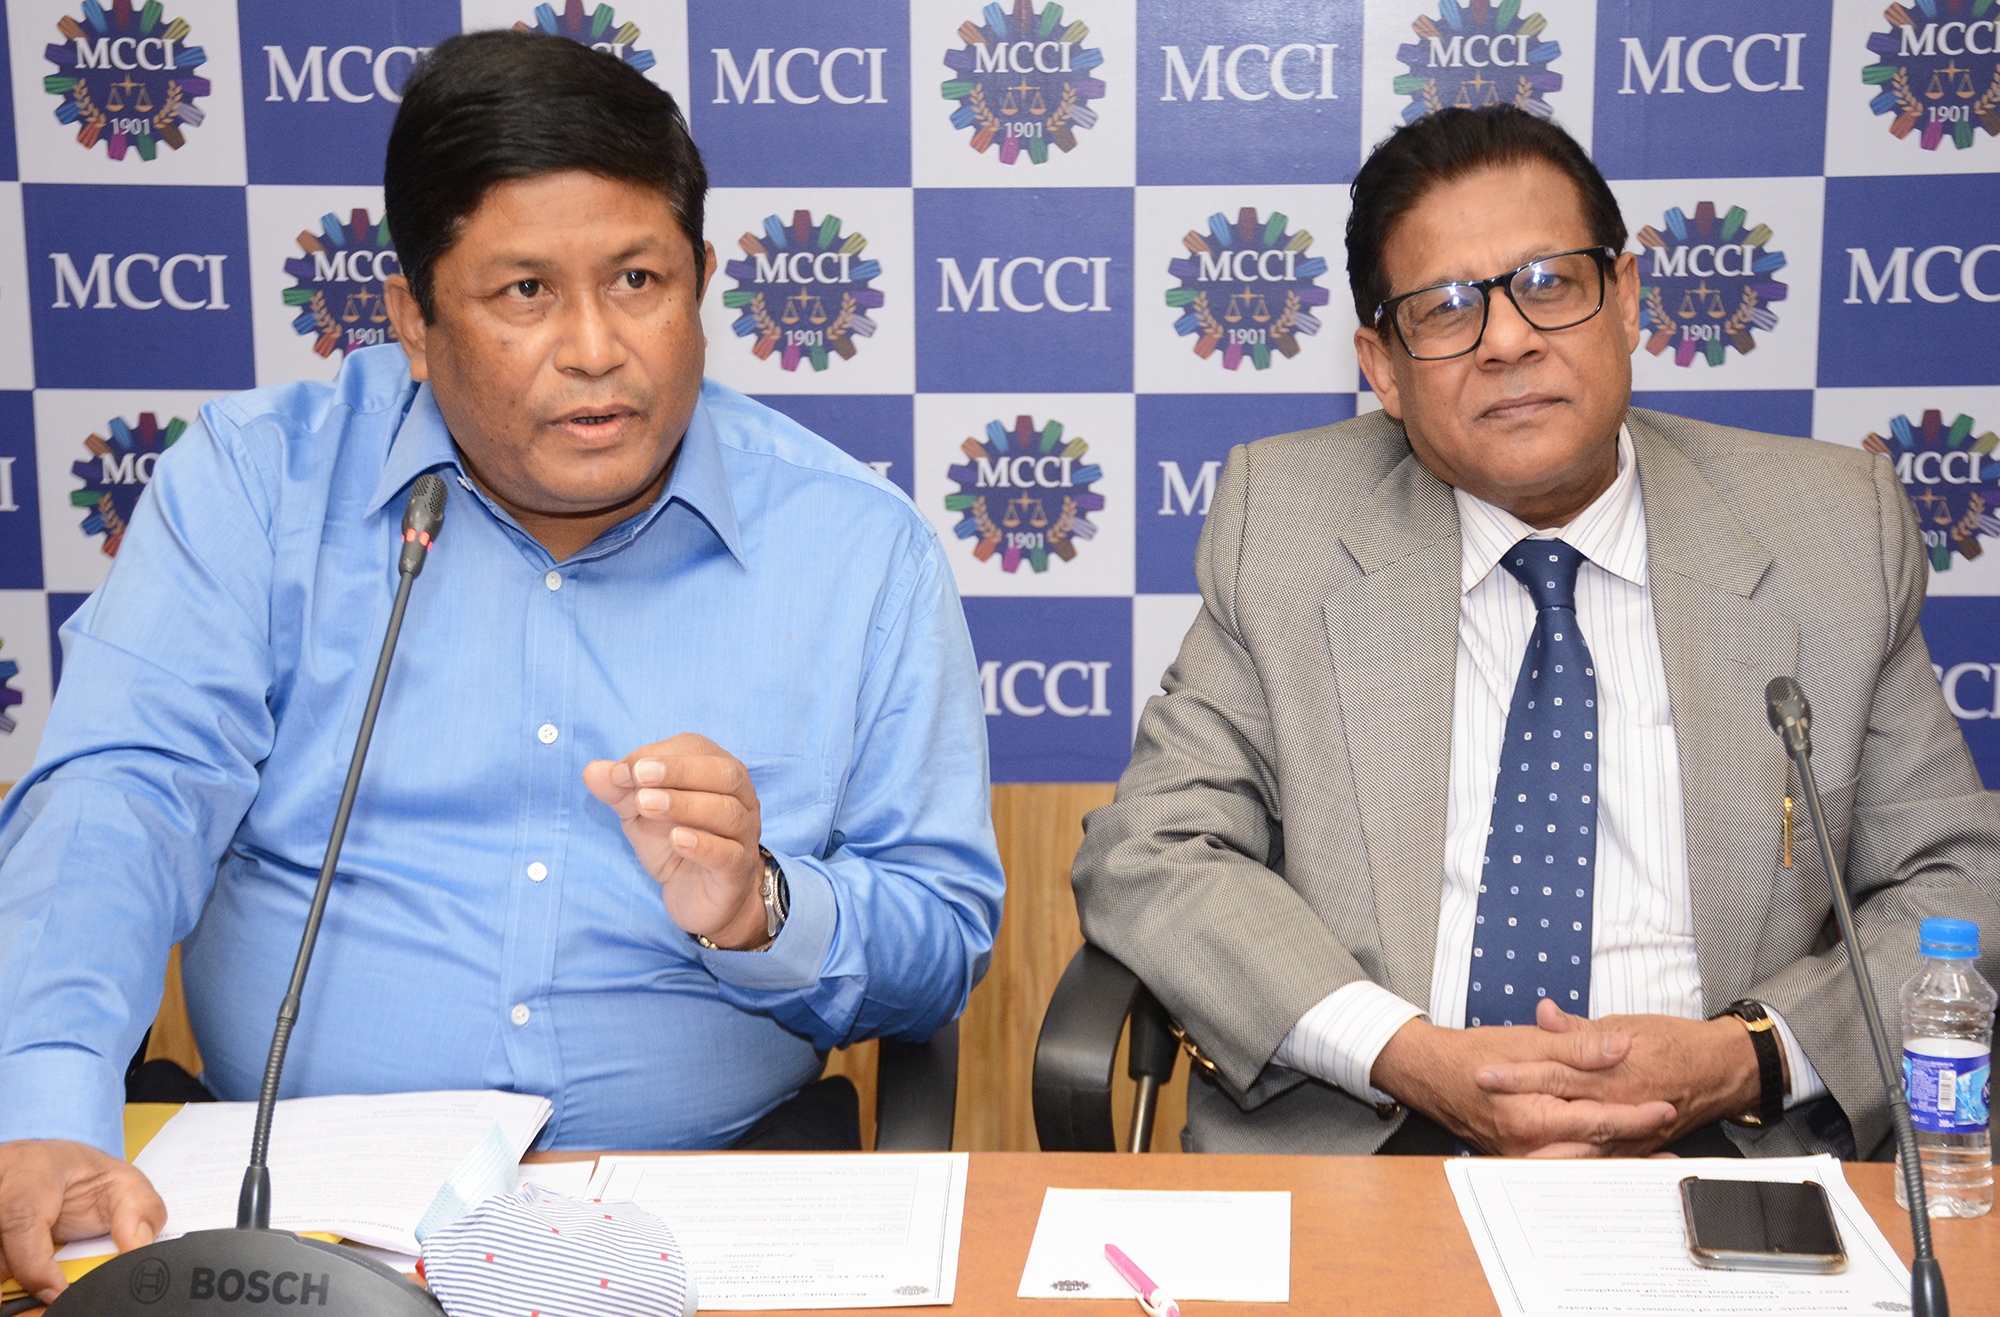 Shri Deba Kumar Sonowal, IRS, Commissioner of Income Tax, TDS, Kolkata, Ministry of Finance, Govt. of India addressing the Session on MCCI Knowledge Series